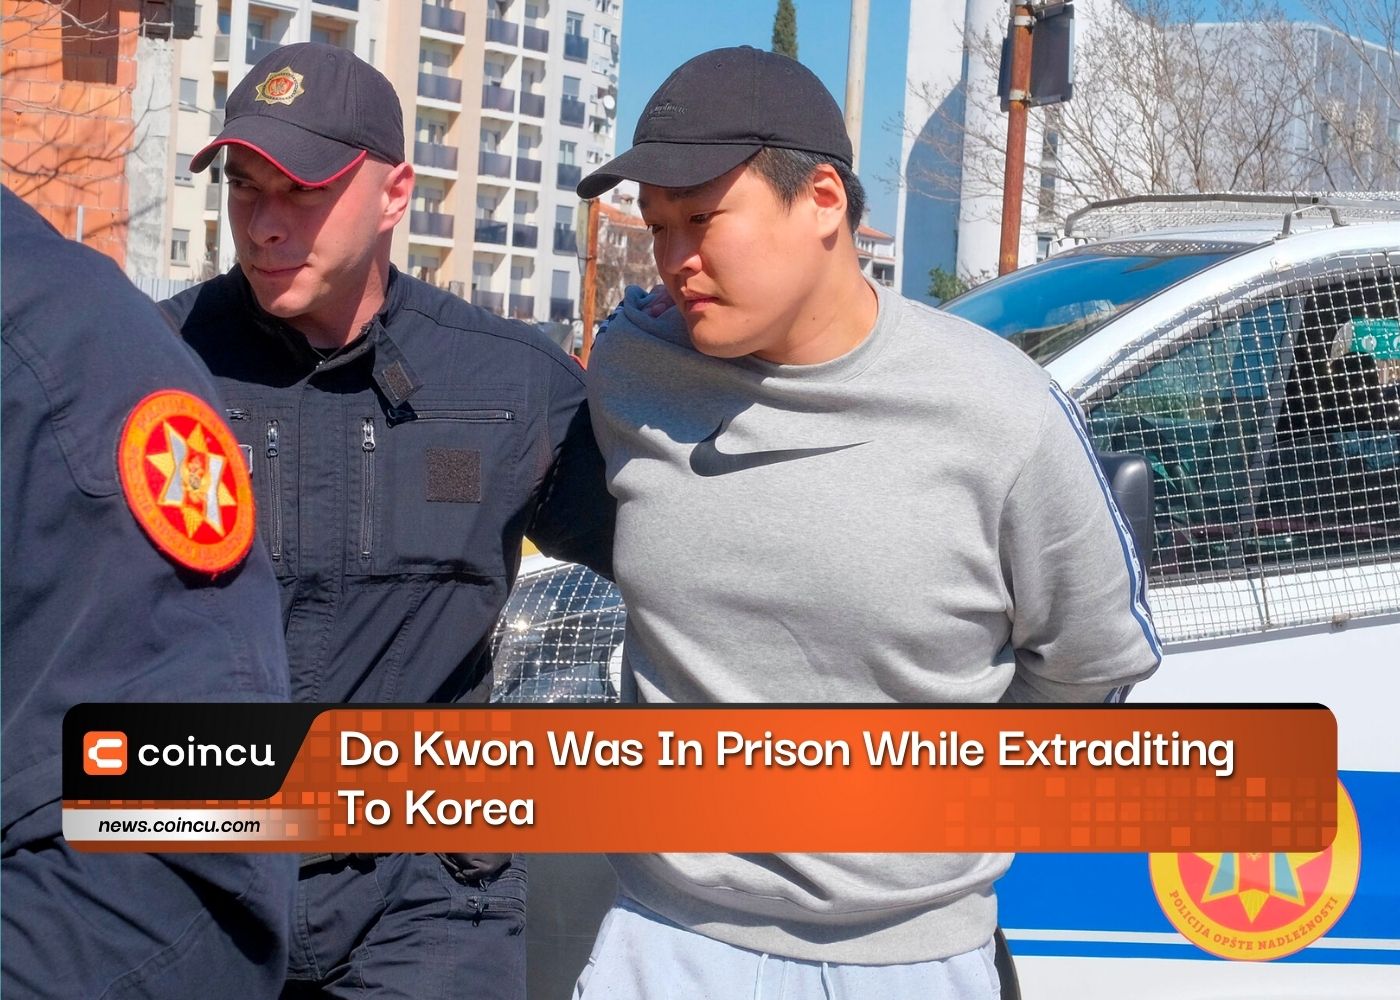 BREAKING: Do Kwon Was In Prison While Extraditing To Korea